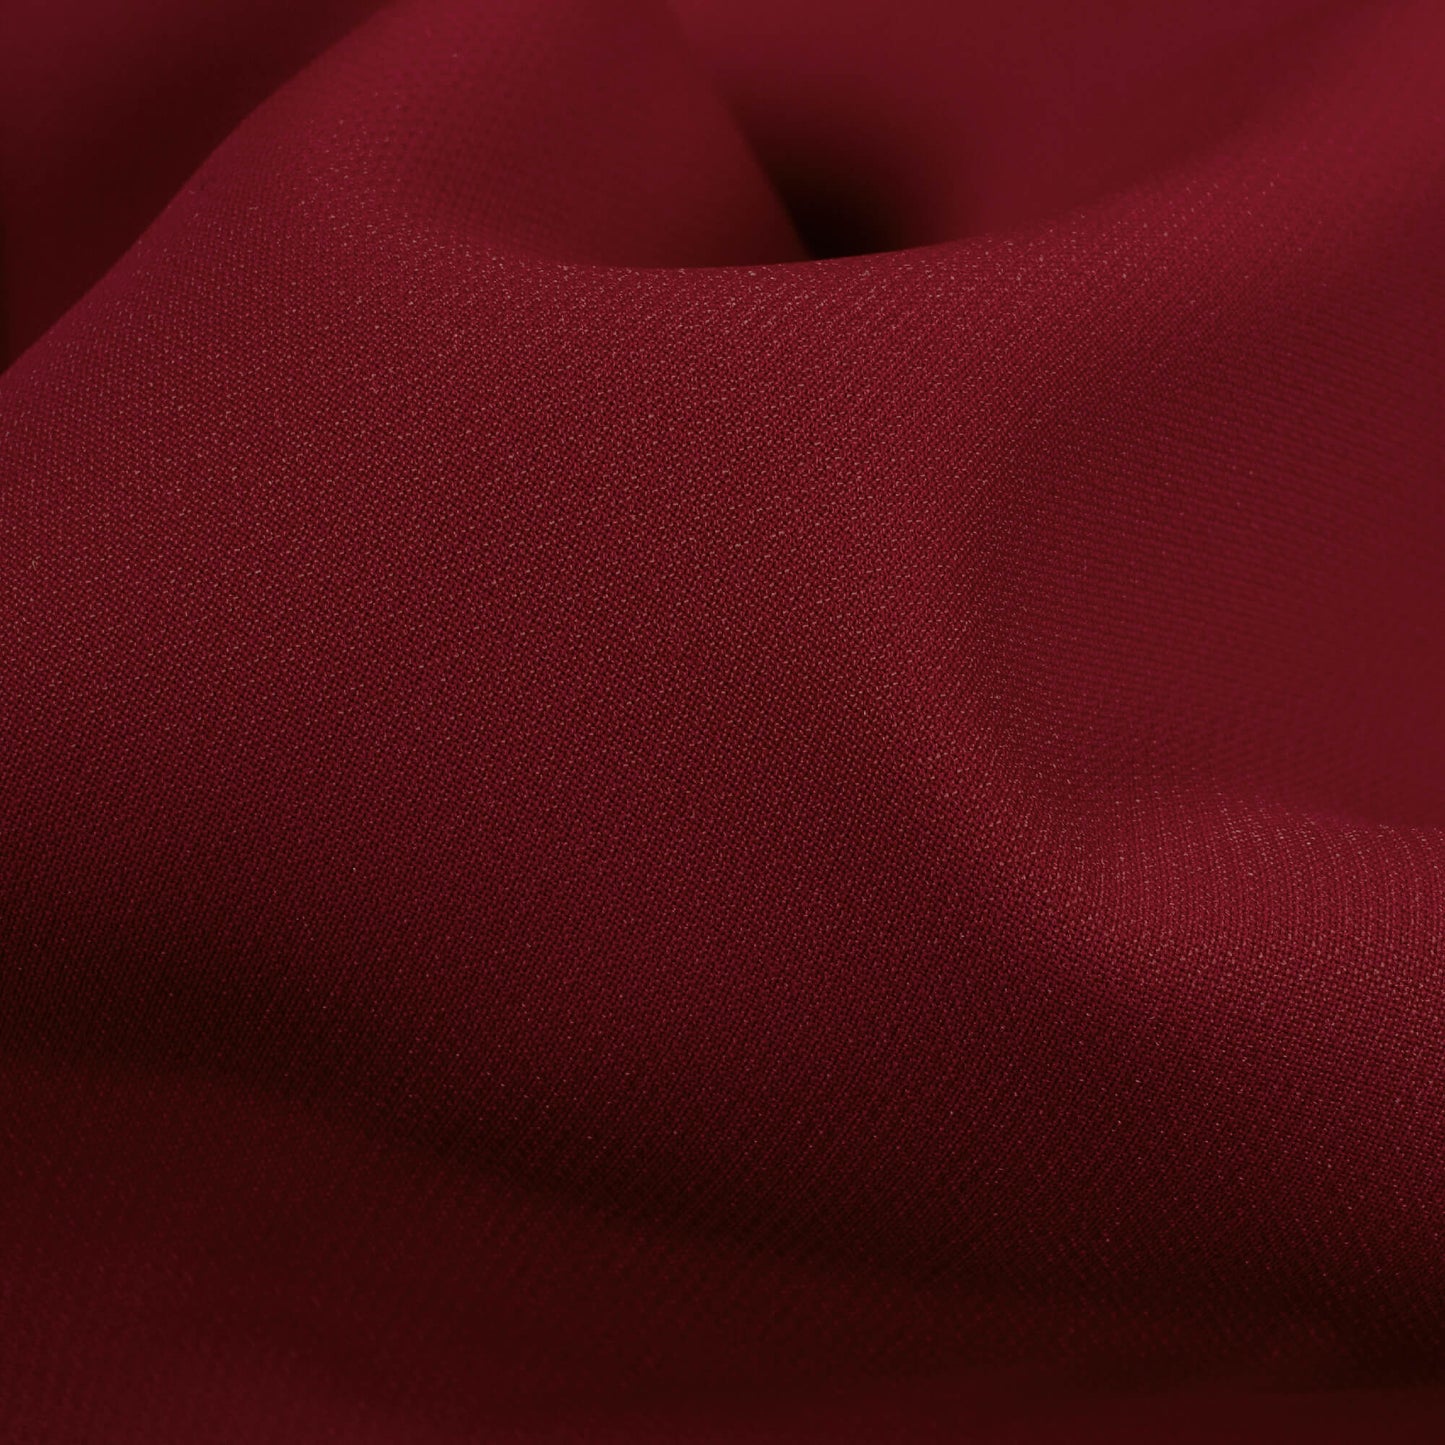 Maroon Plain Vintage Crepe Fabric (Width 56 Inches)